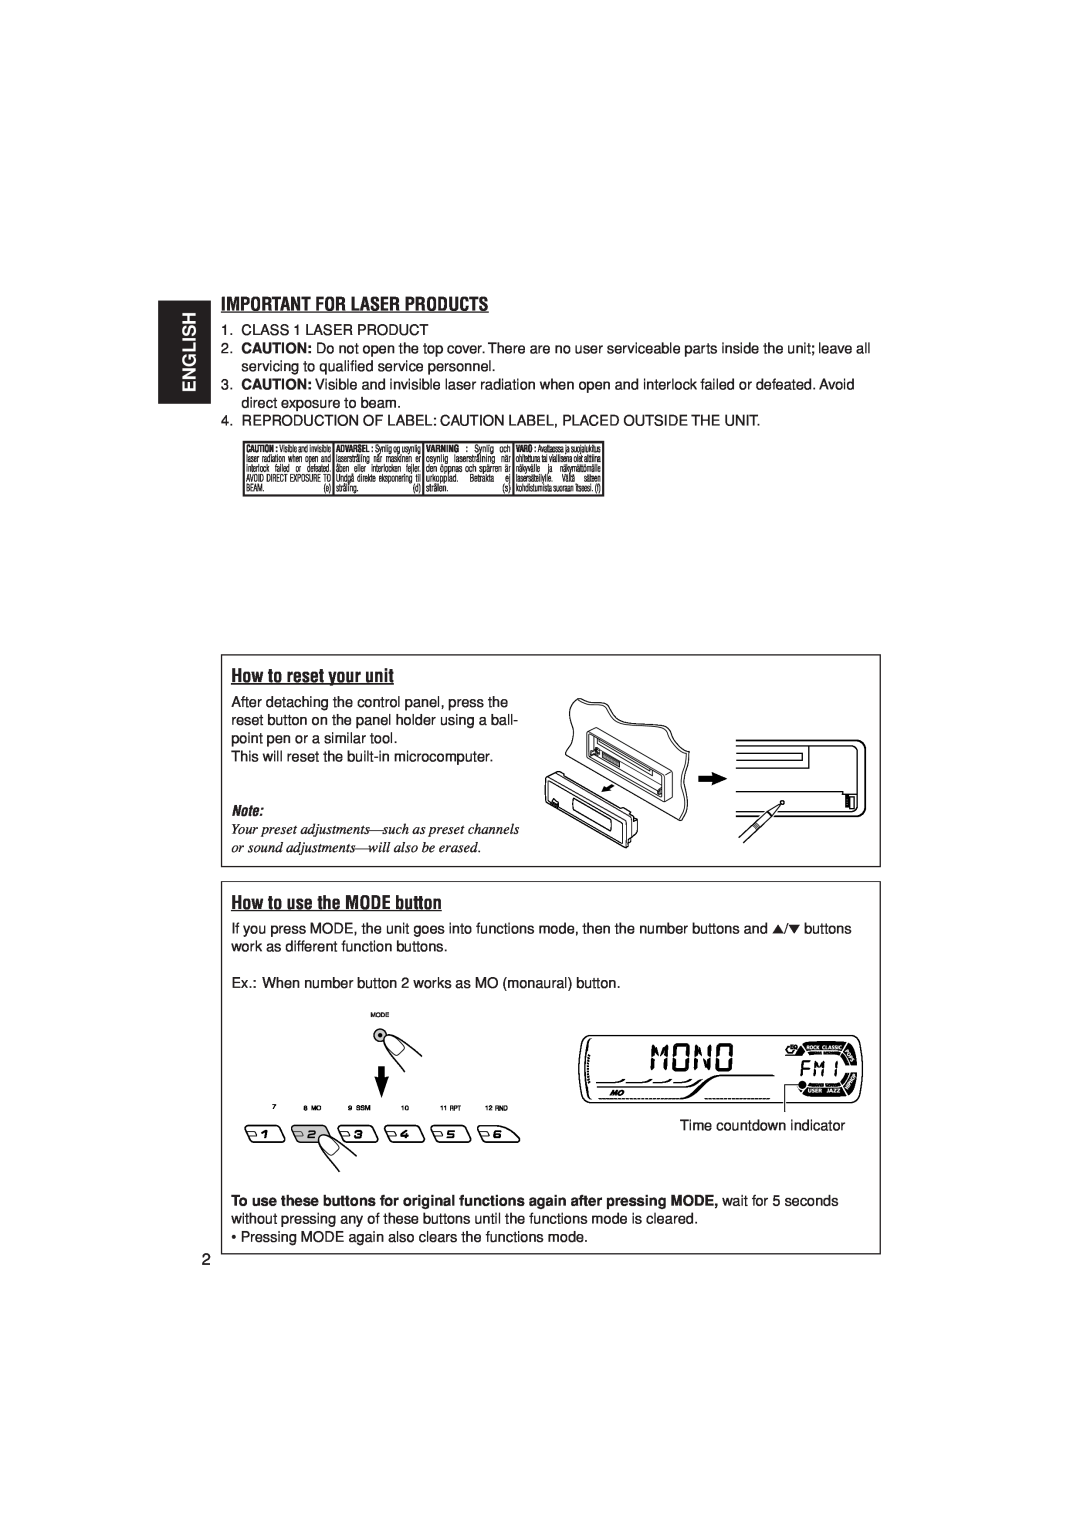 JVC KD-G305 manual English, Important For Laser Products, How to reset your unit, How to use the MODE button 